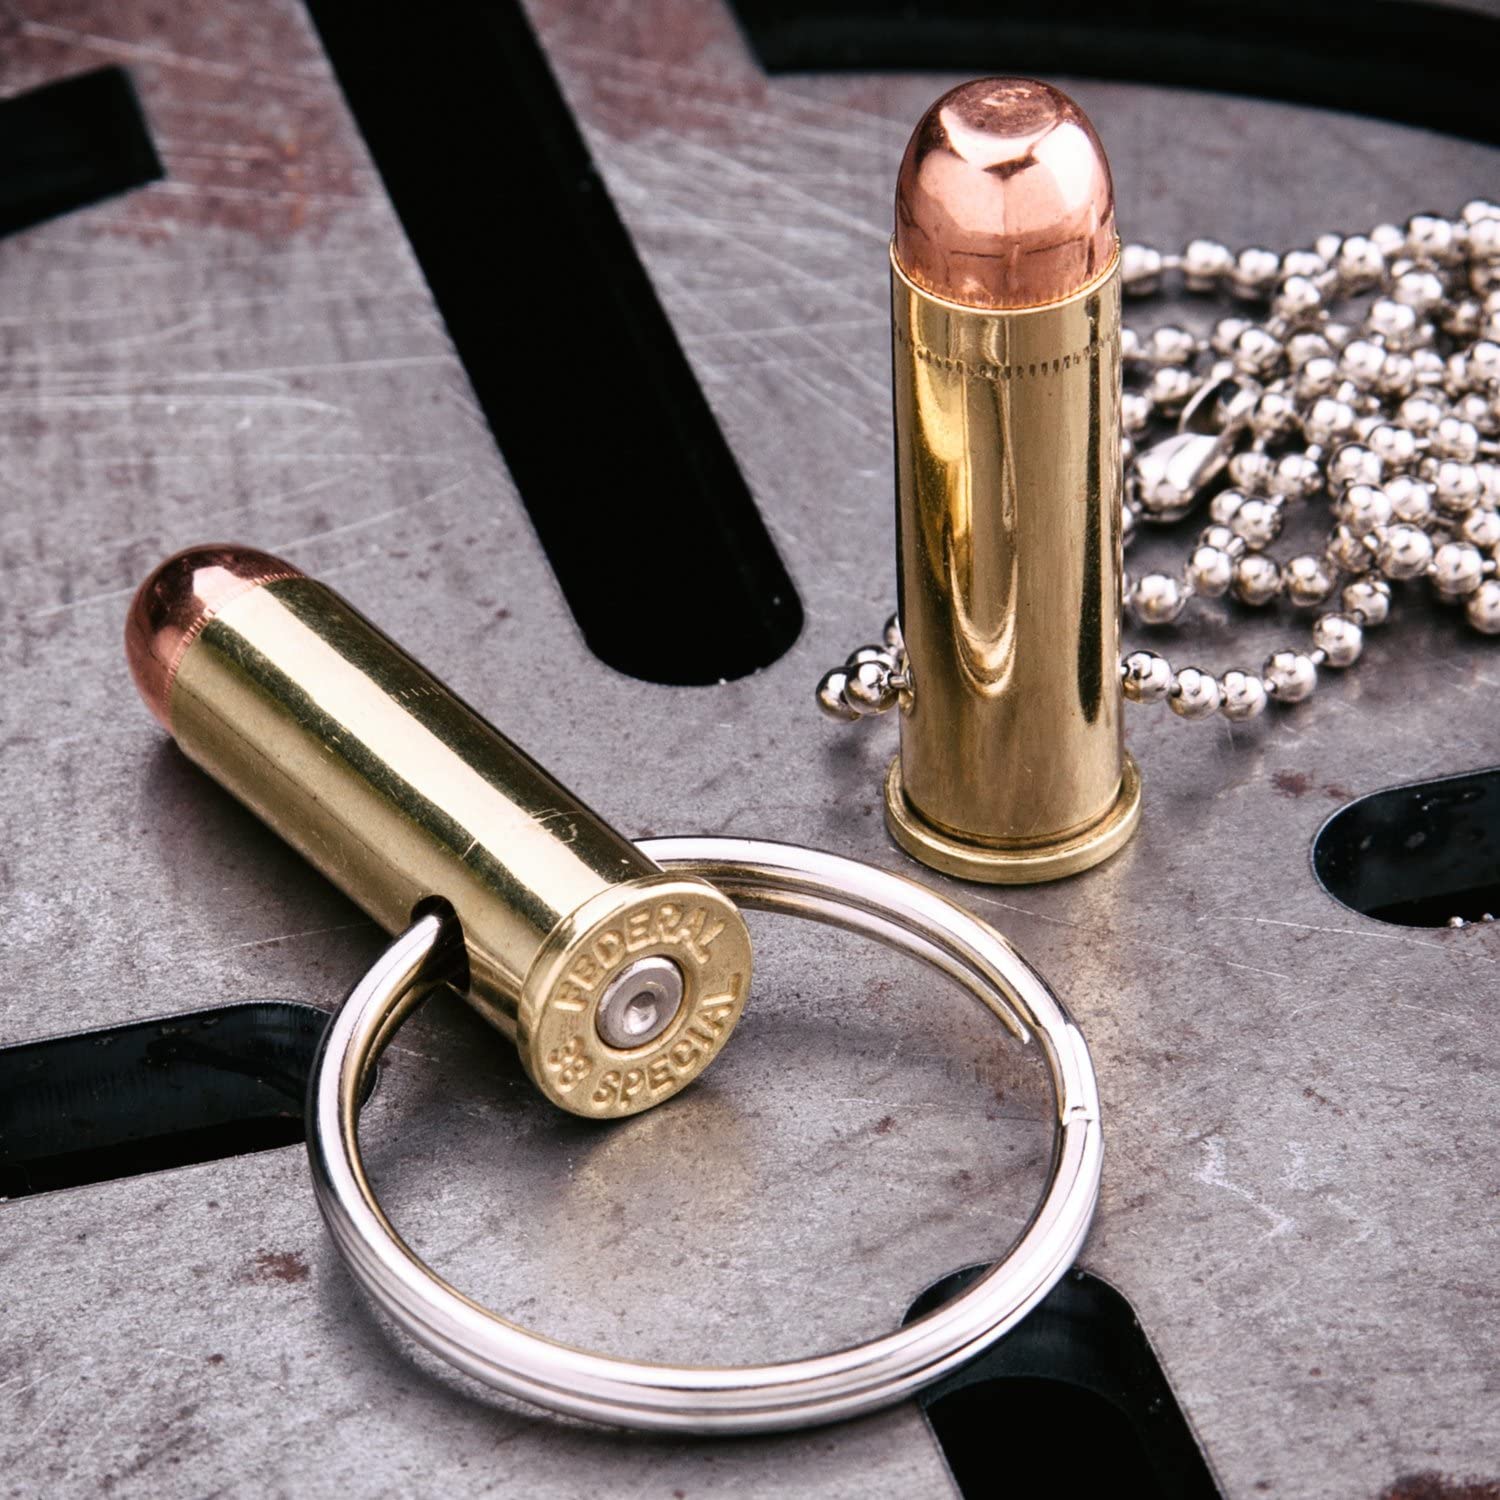 Shots fired by Lucky Shot USA .38 Special Ball Chain Bullet Necklace Kogelketting (60cm)